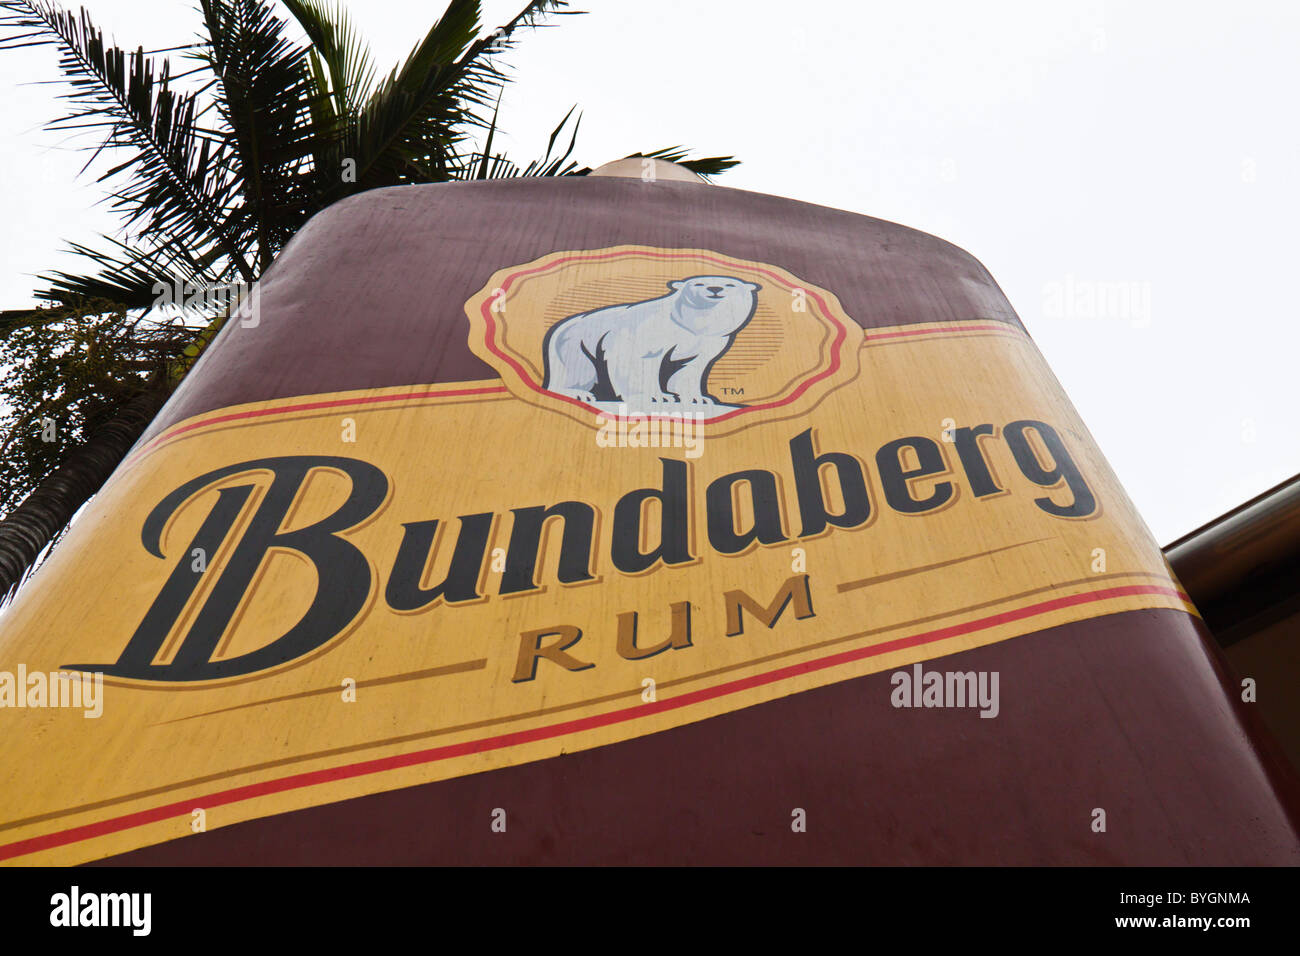 Statue of a bottle at the Bundaberg Rum factory, Bundaberg, Queensland. Home of one of thr most famoud rum's of the world. Stock Photo